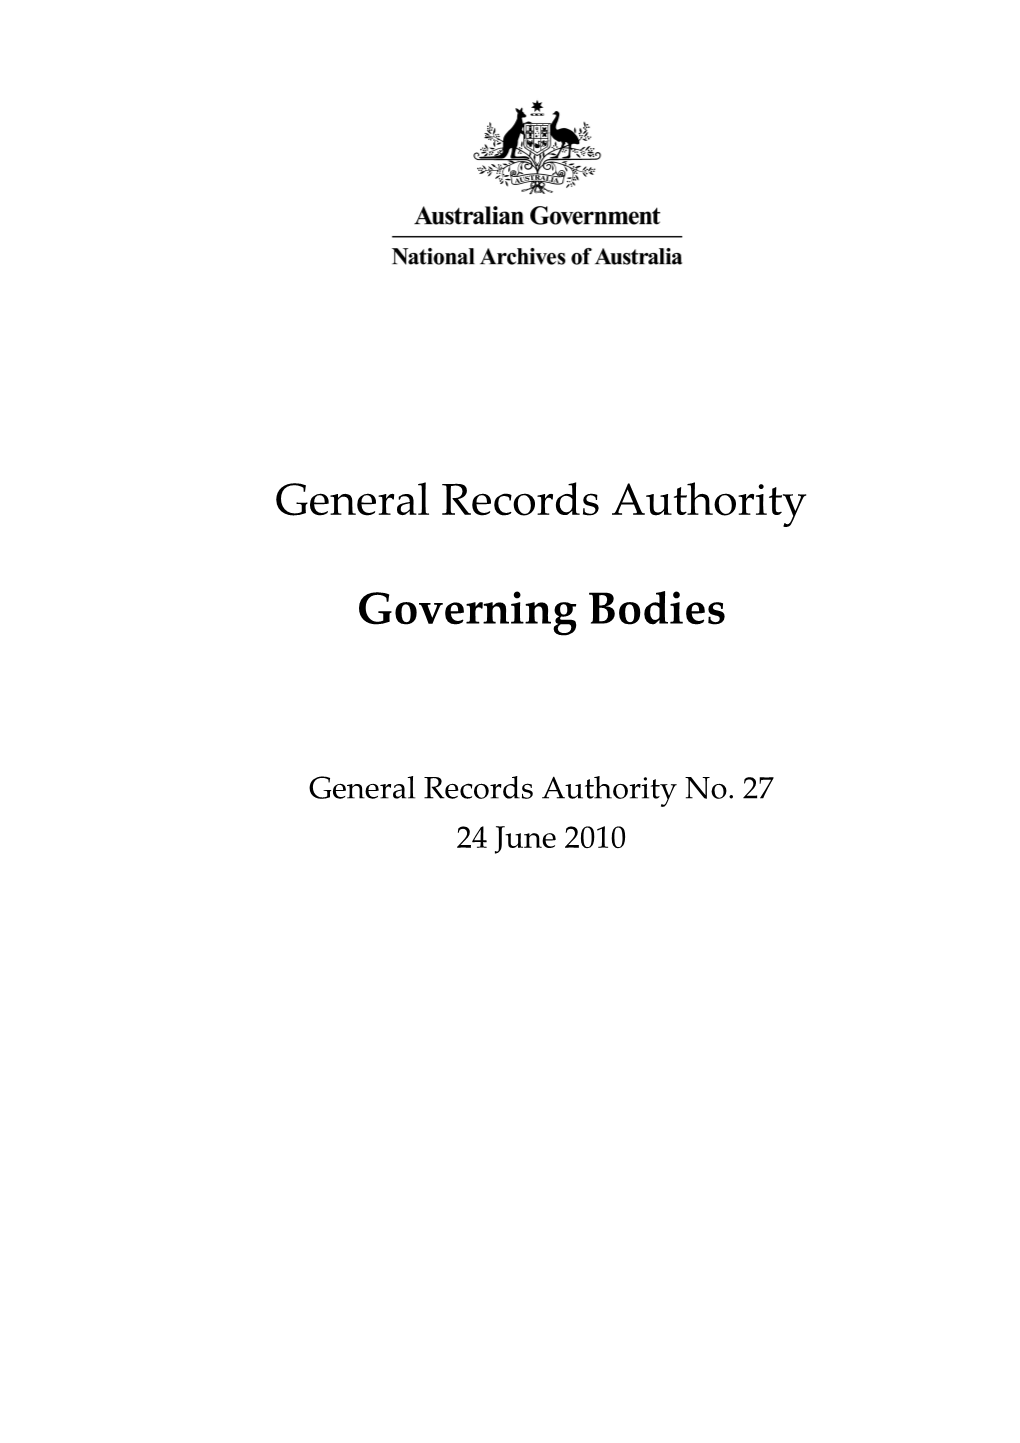 General Records Authority